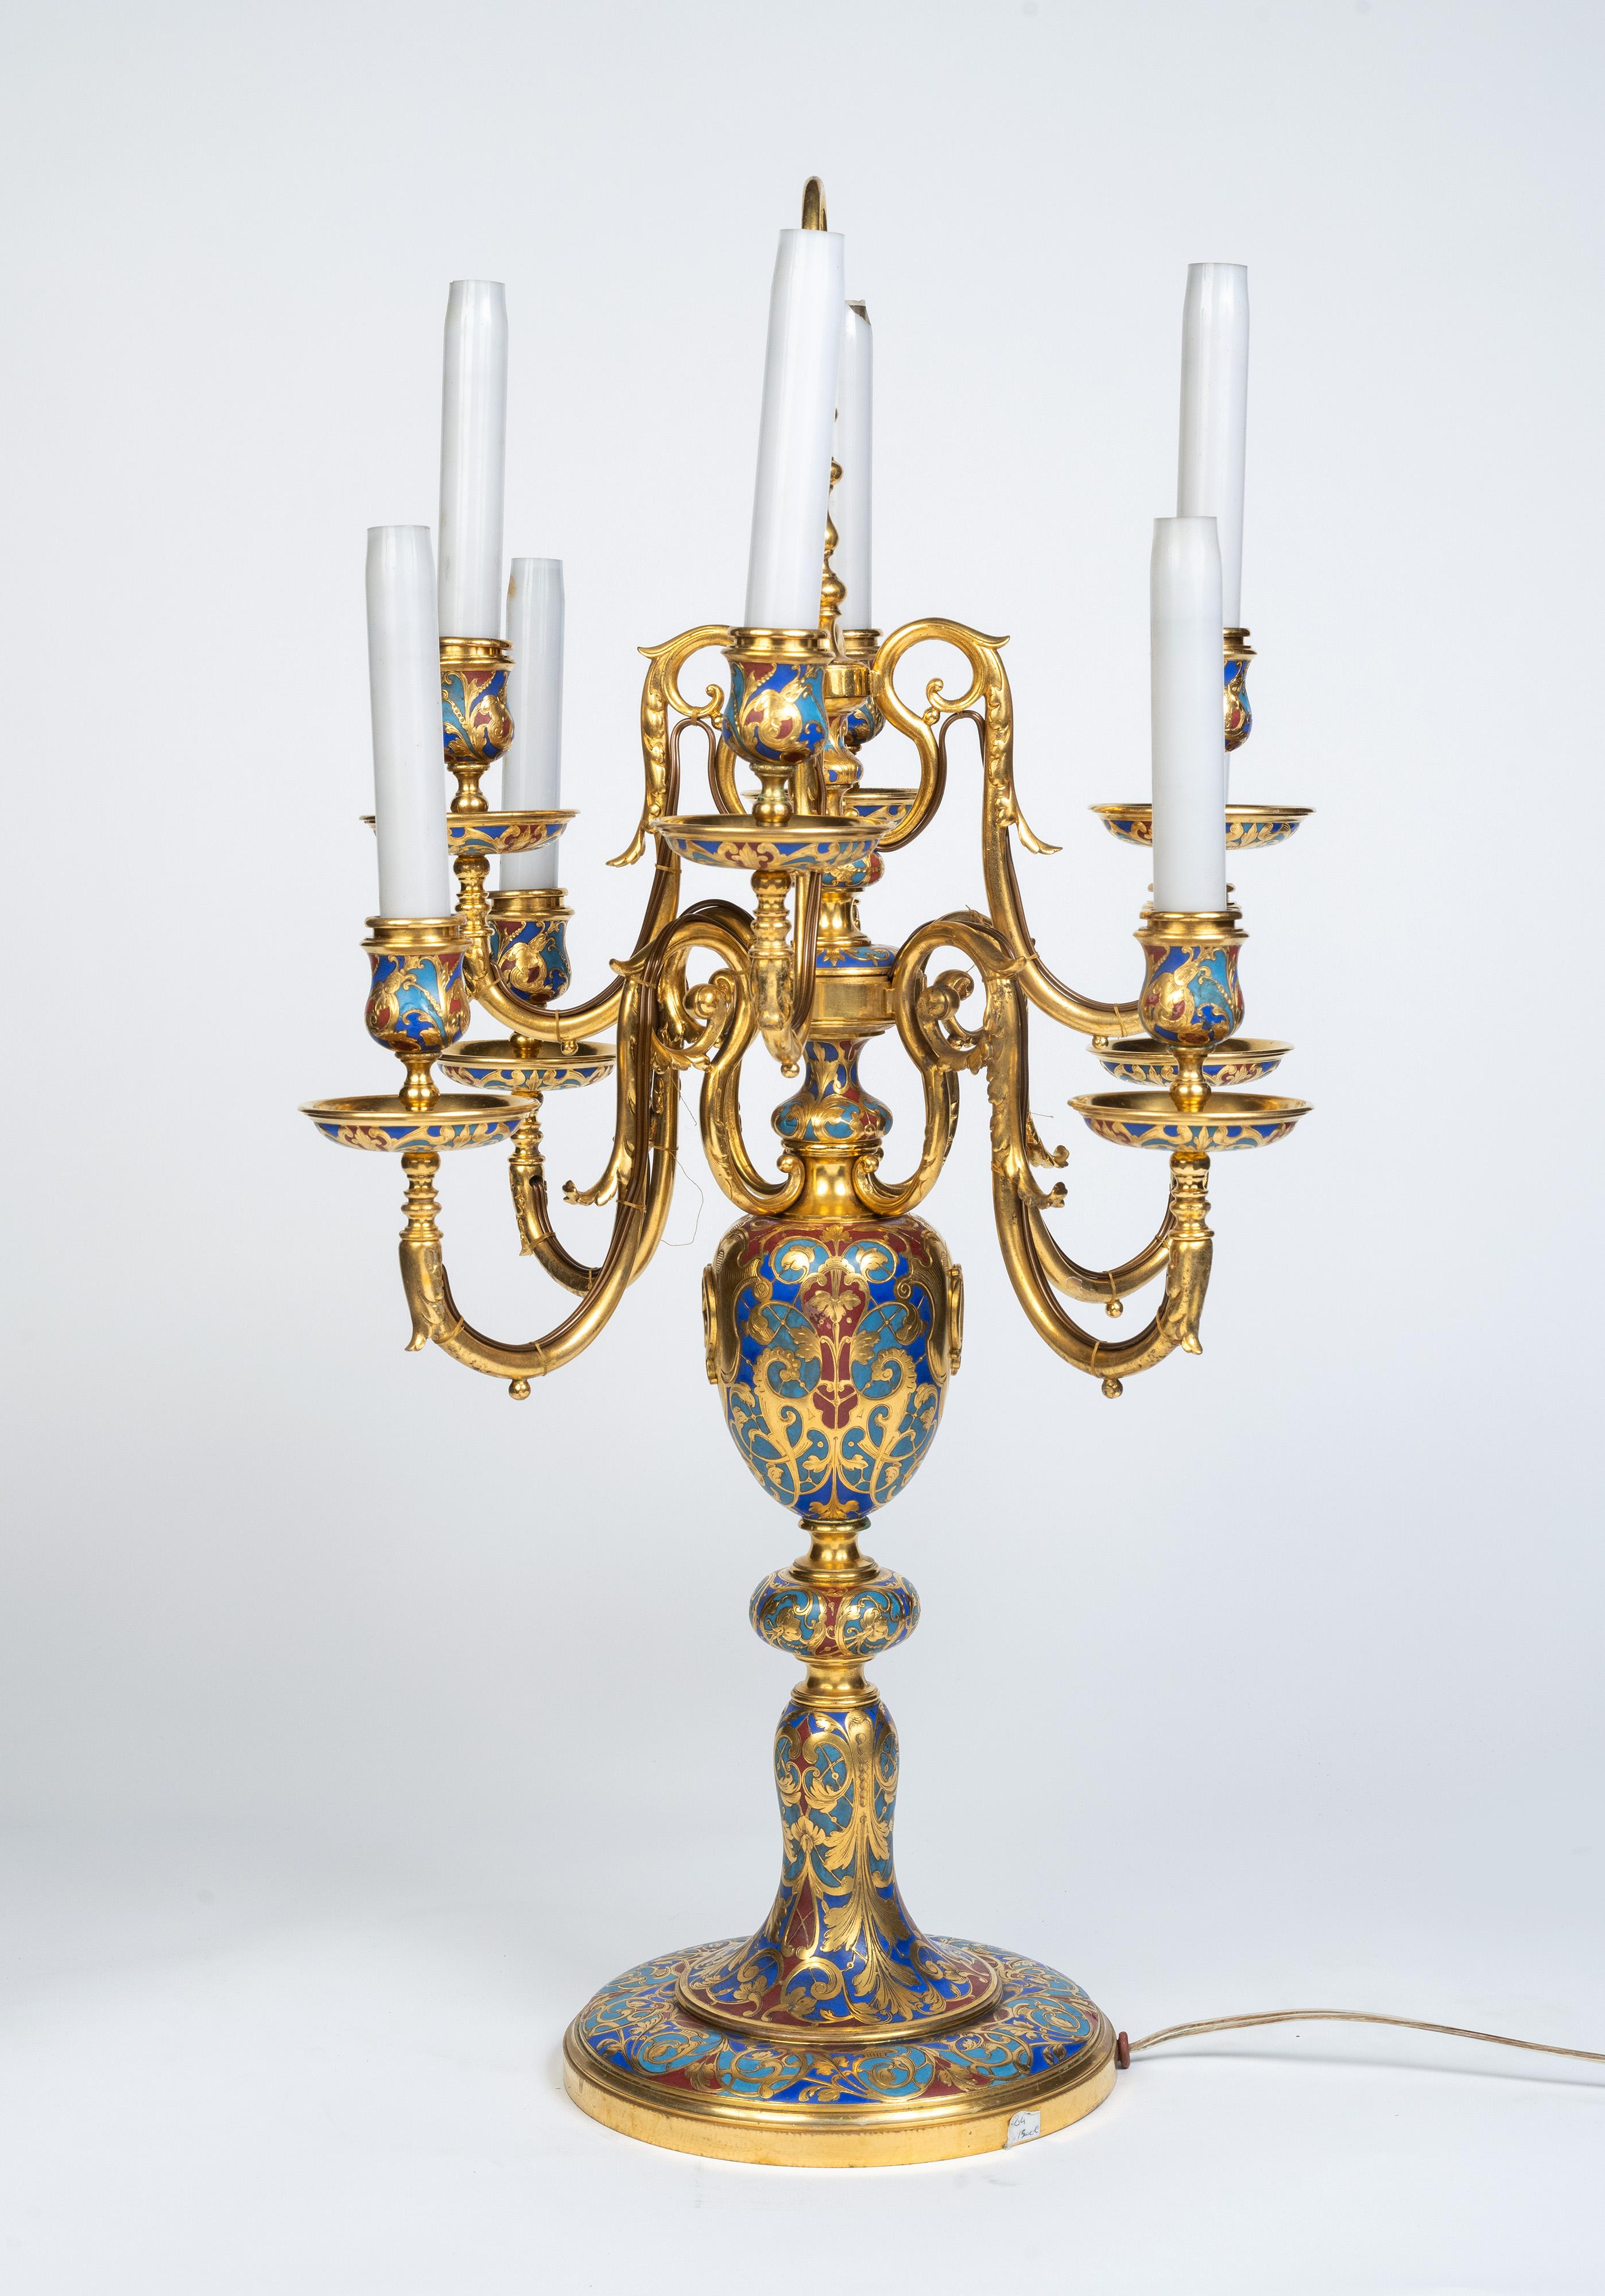 Napoleon III An Exceptional Pair of Champleve Enamel Ormolu Candelabra by Sevin & Barbedienne For Sale